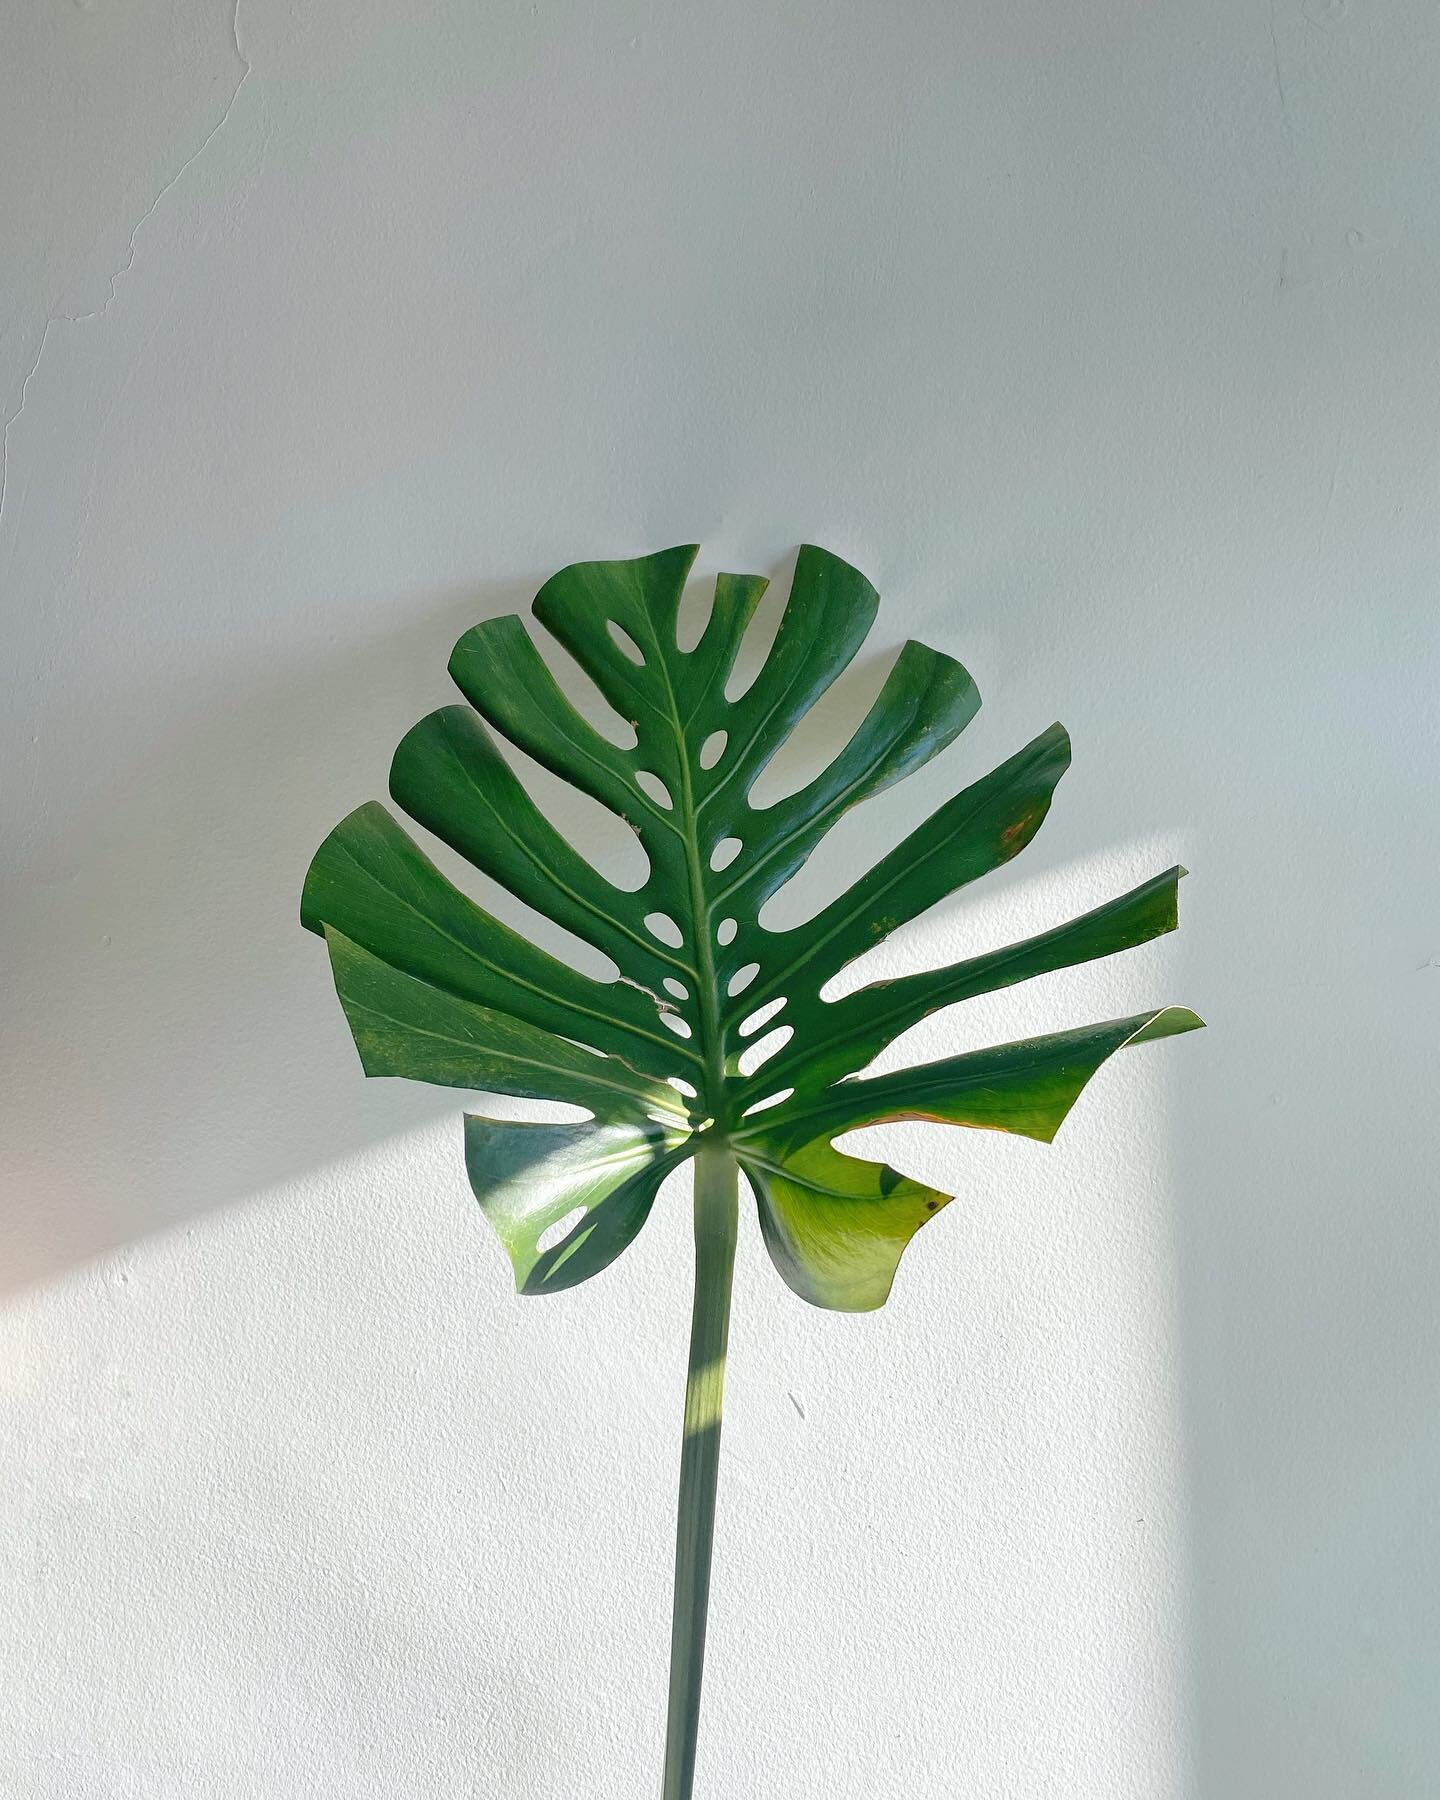 This is the last of the monstera deliciosa in my space.  It&rsquo;s is imperfect with cut leaves, survived a harsh Toronto winter, and ready to bask in the July sun. Sound familiar!? Life mimics nature, people reflect our environment, and TCM is the 